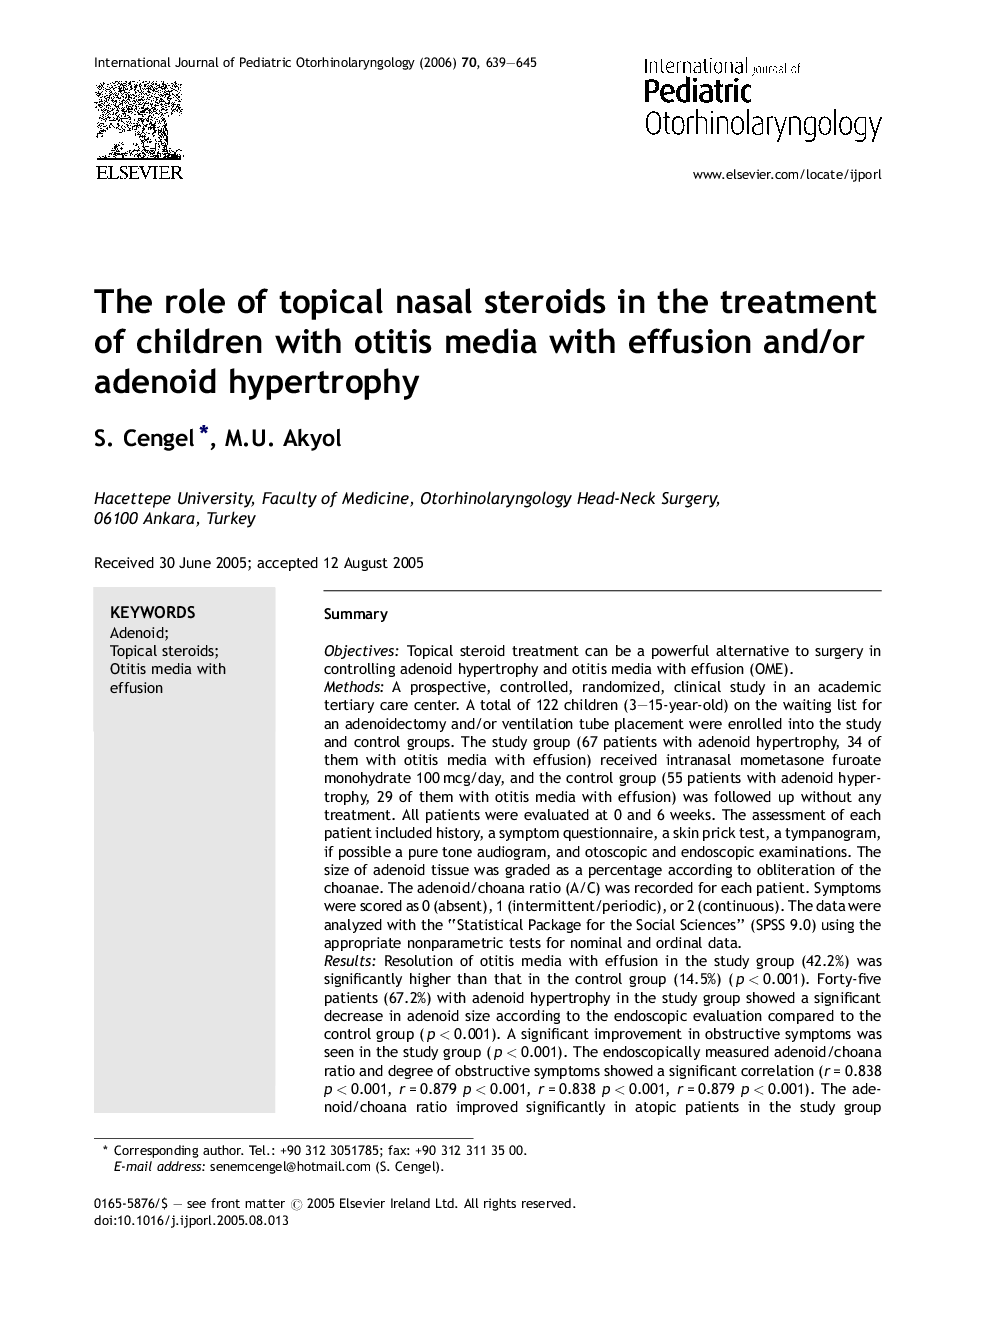 The role of topical nasal steroids in the treatment of children with otitis media with effusion and/or adenoid hypertrophy